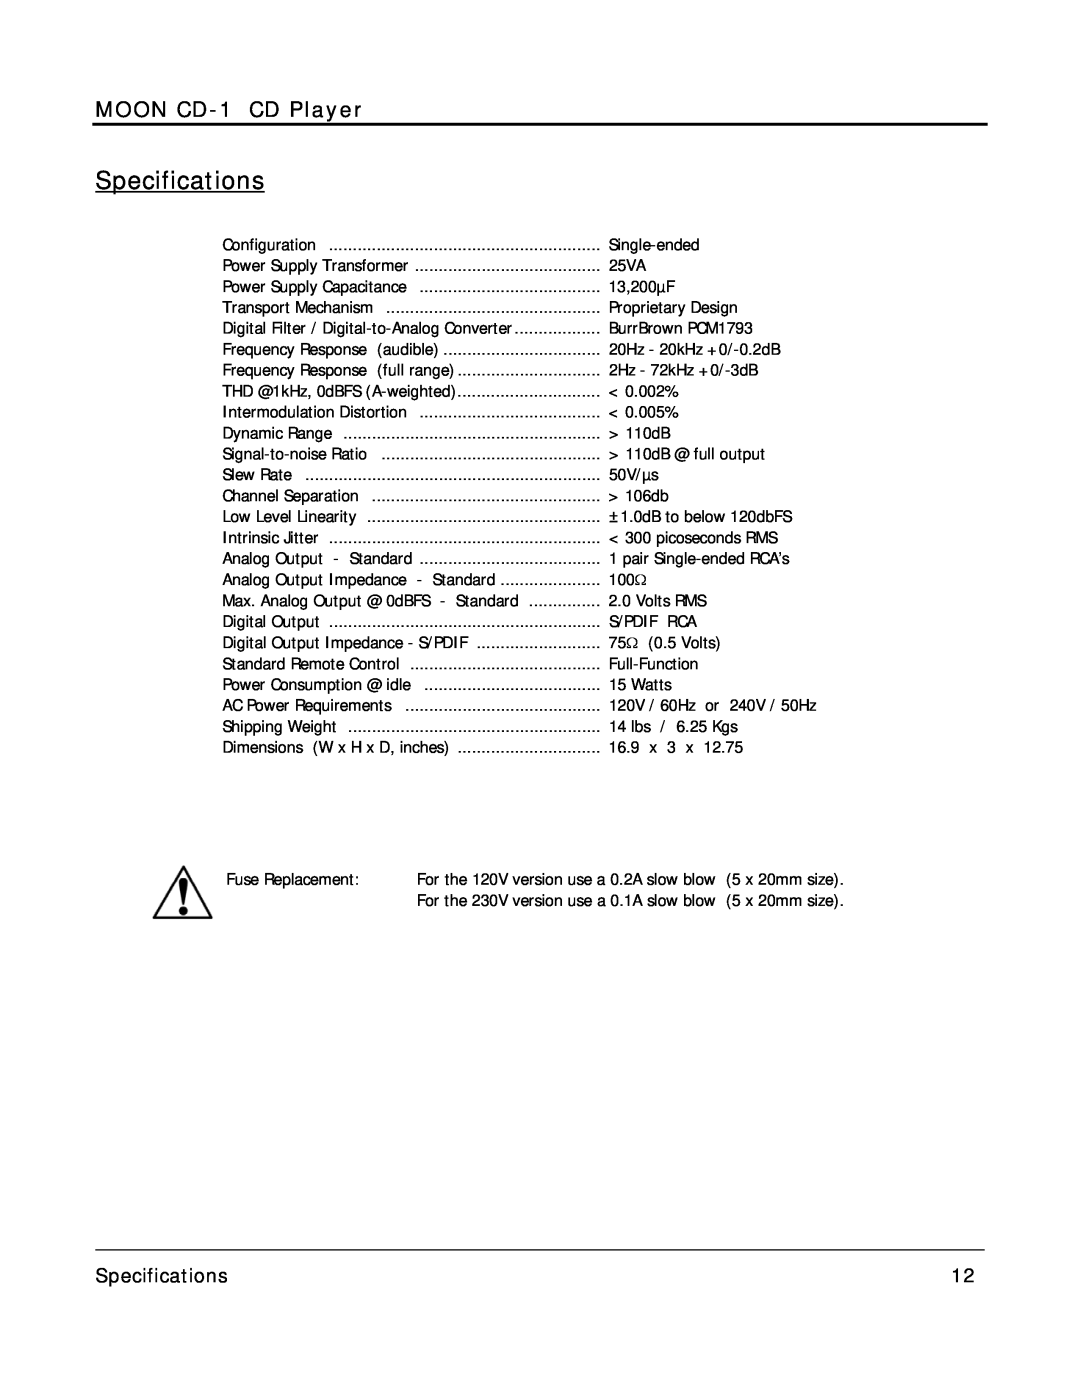 Simaudio owner manual Specifications, MOON CD-1CD Player 